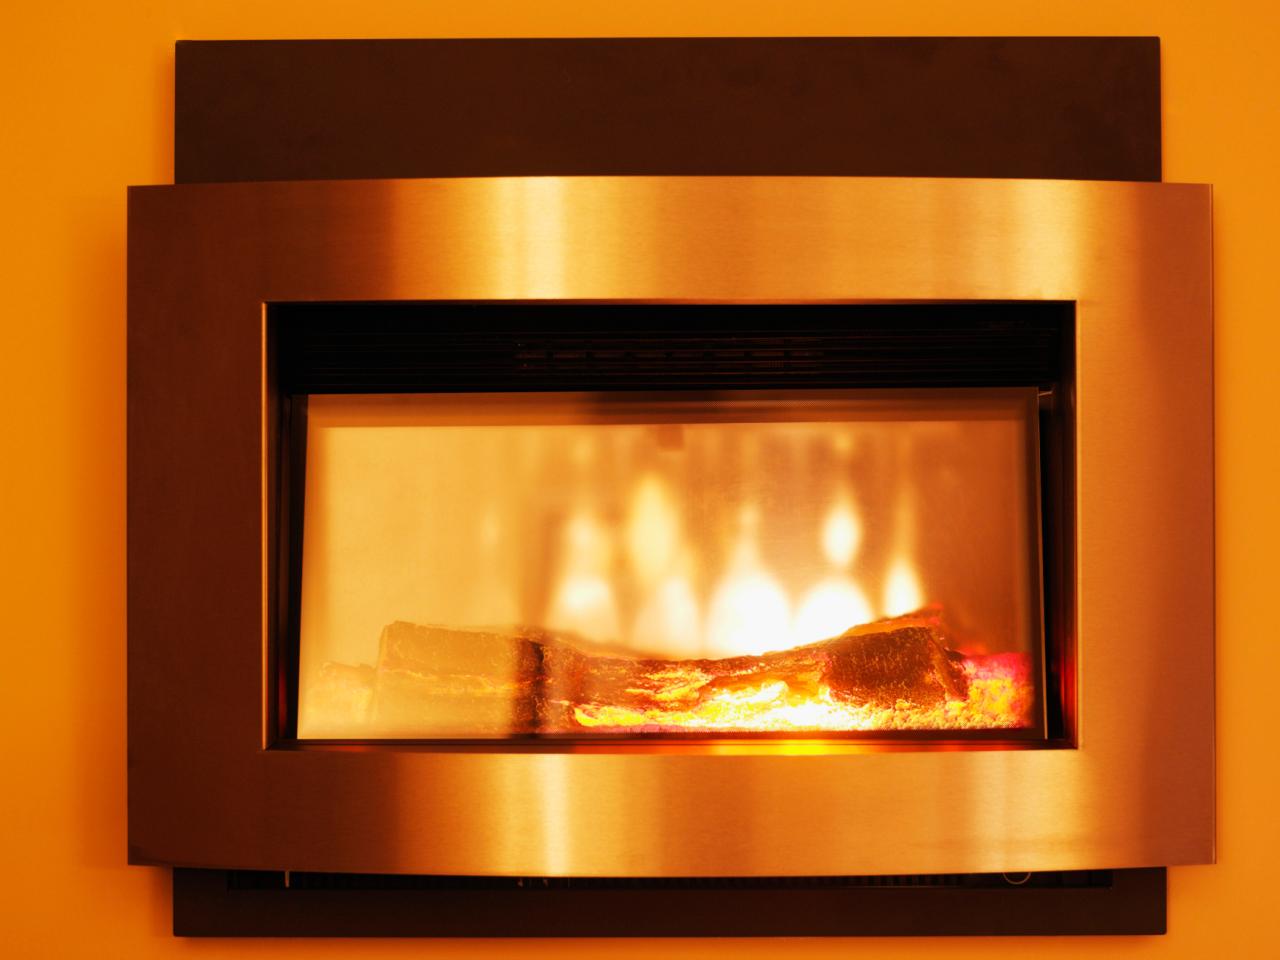 Gas Fireplaces Offer Efficient Heating, Portable Natural Gas Fireplace Indoor